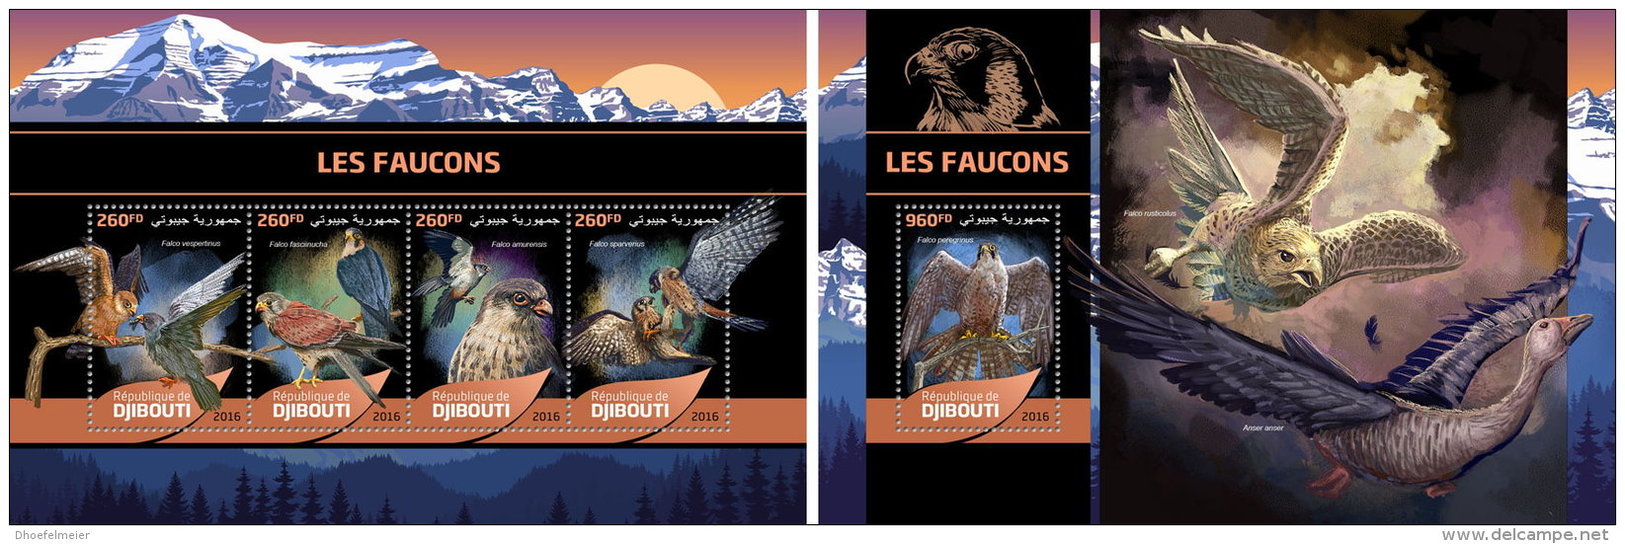 DJIBOUTI 2016 ** Hawks Falken Faucon M/S+S/S - OFFICIAL ISSUE - A1648 - Arends & Roofvogels